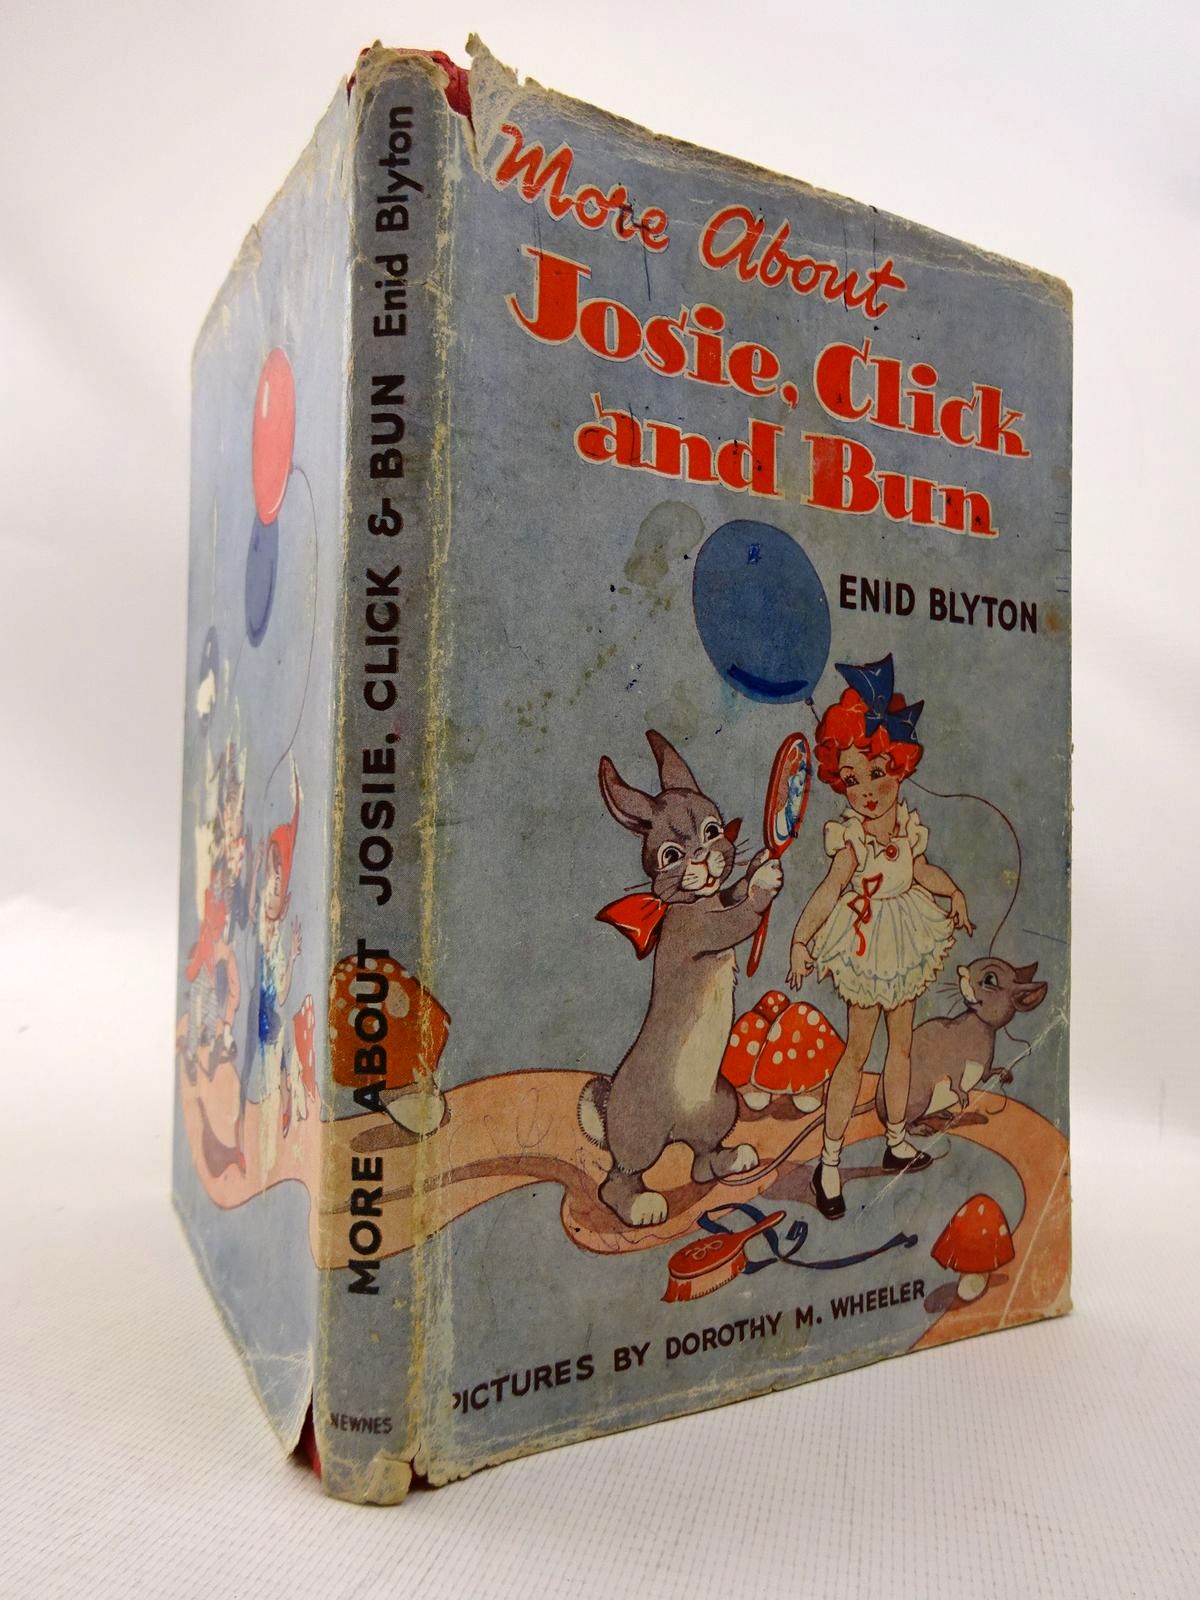 Photo of MORE ABOUT JOSIE, CLICK AND BUN written by Blyton, Enid illustrated by Wheeler, Dorothy M. published by George Newnes Ltd. (STOCK CODE: 1815829)  for sale by Stella & Rose's Books